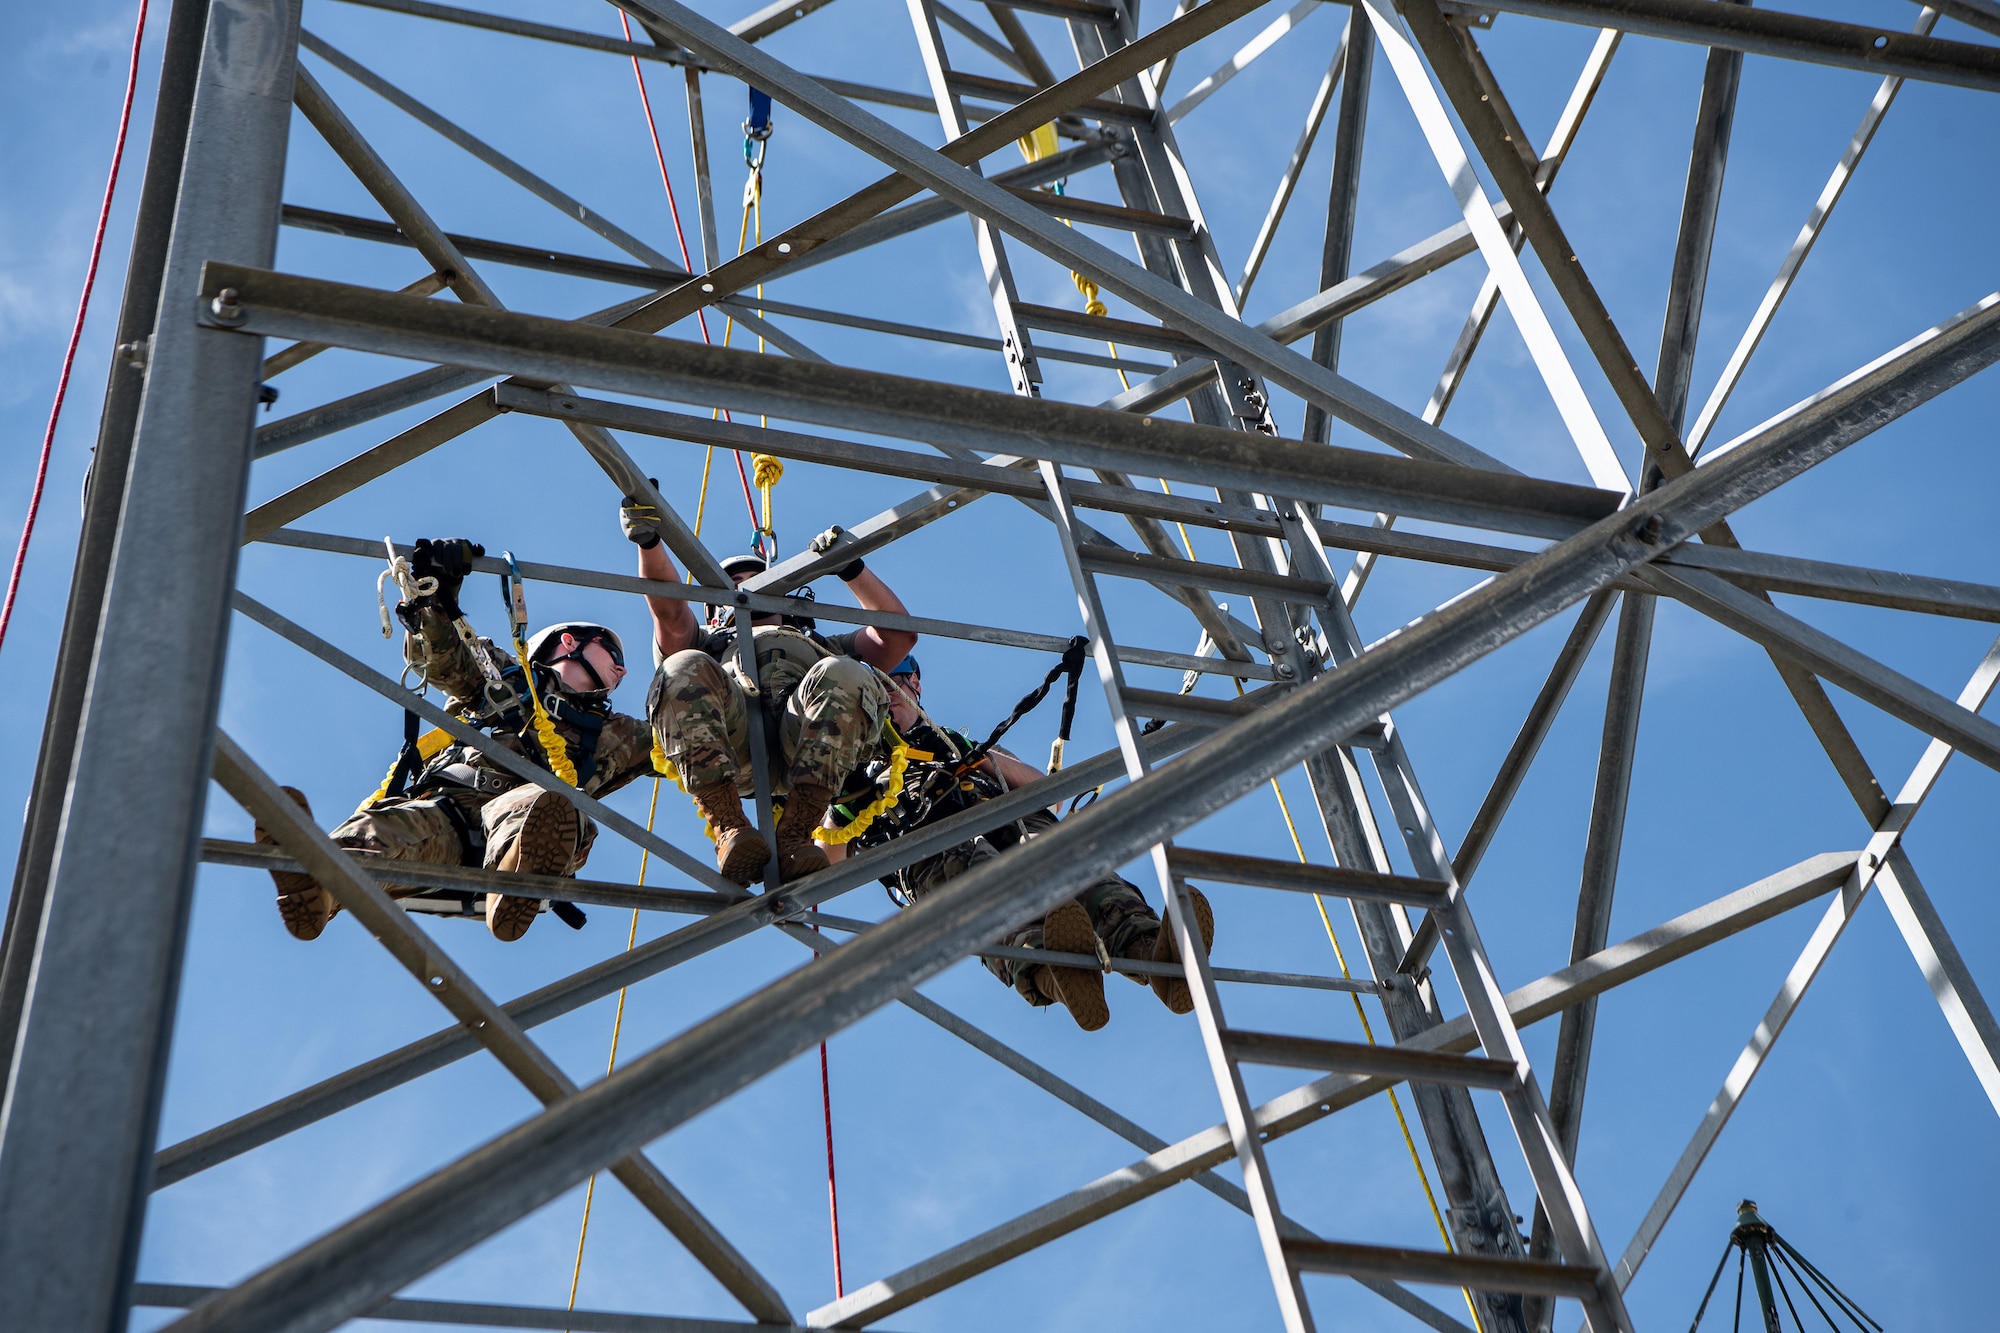 Airmen cling to the side of an antenna tower during a rescue training scenario